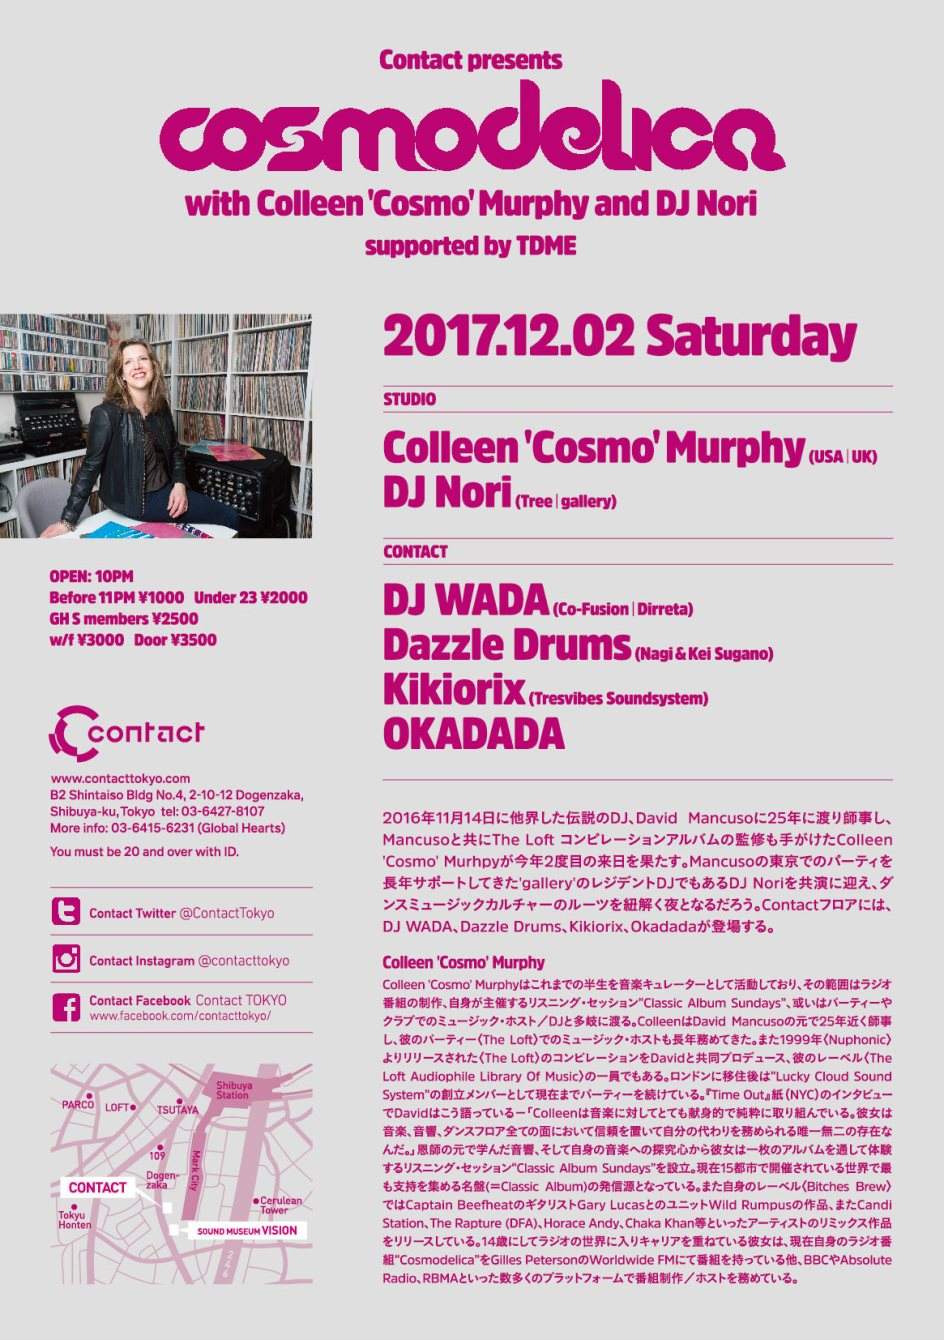 Contact presents Cosmodelica with Colleen 'Cosmo' Murphy and DJ Nori Supported by Tdme - Página trasera